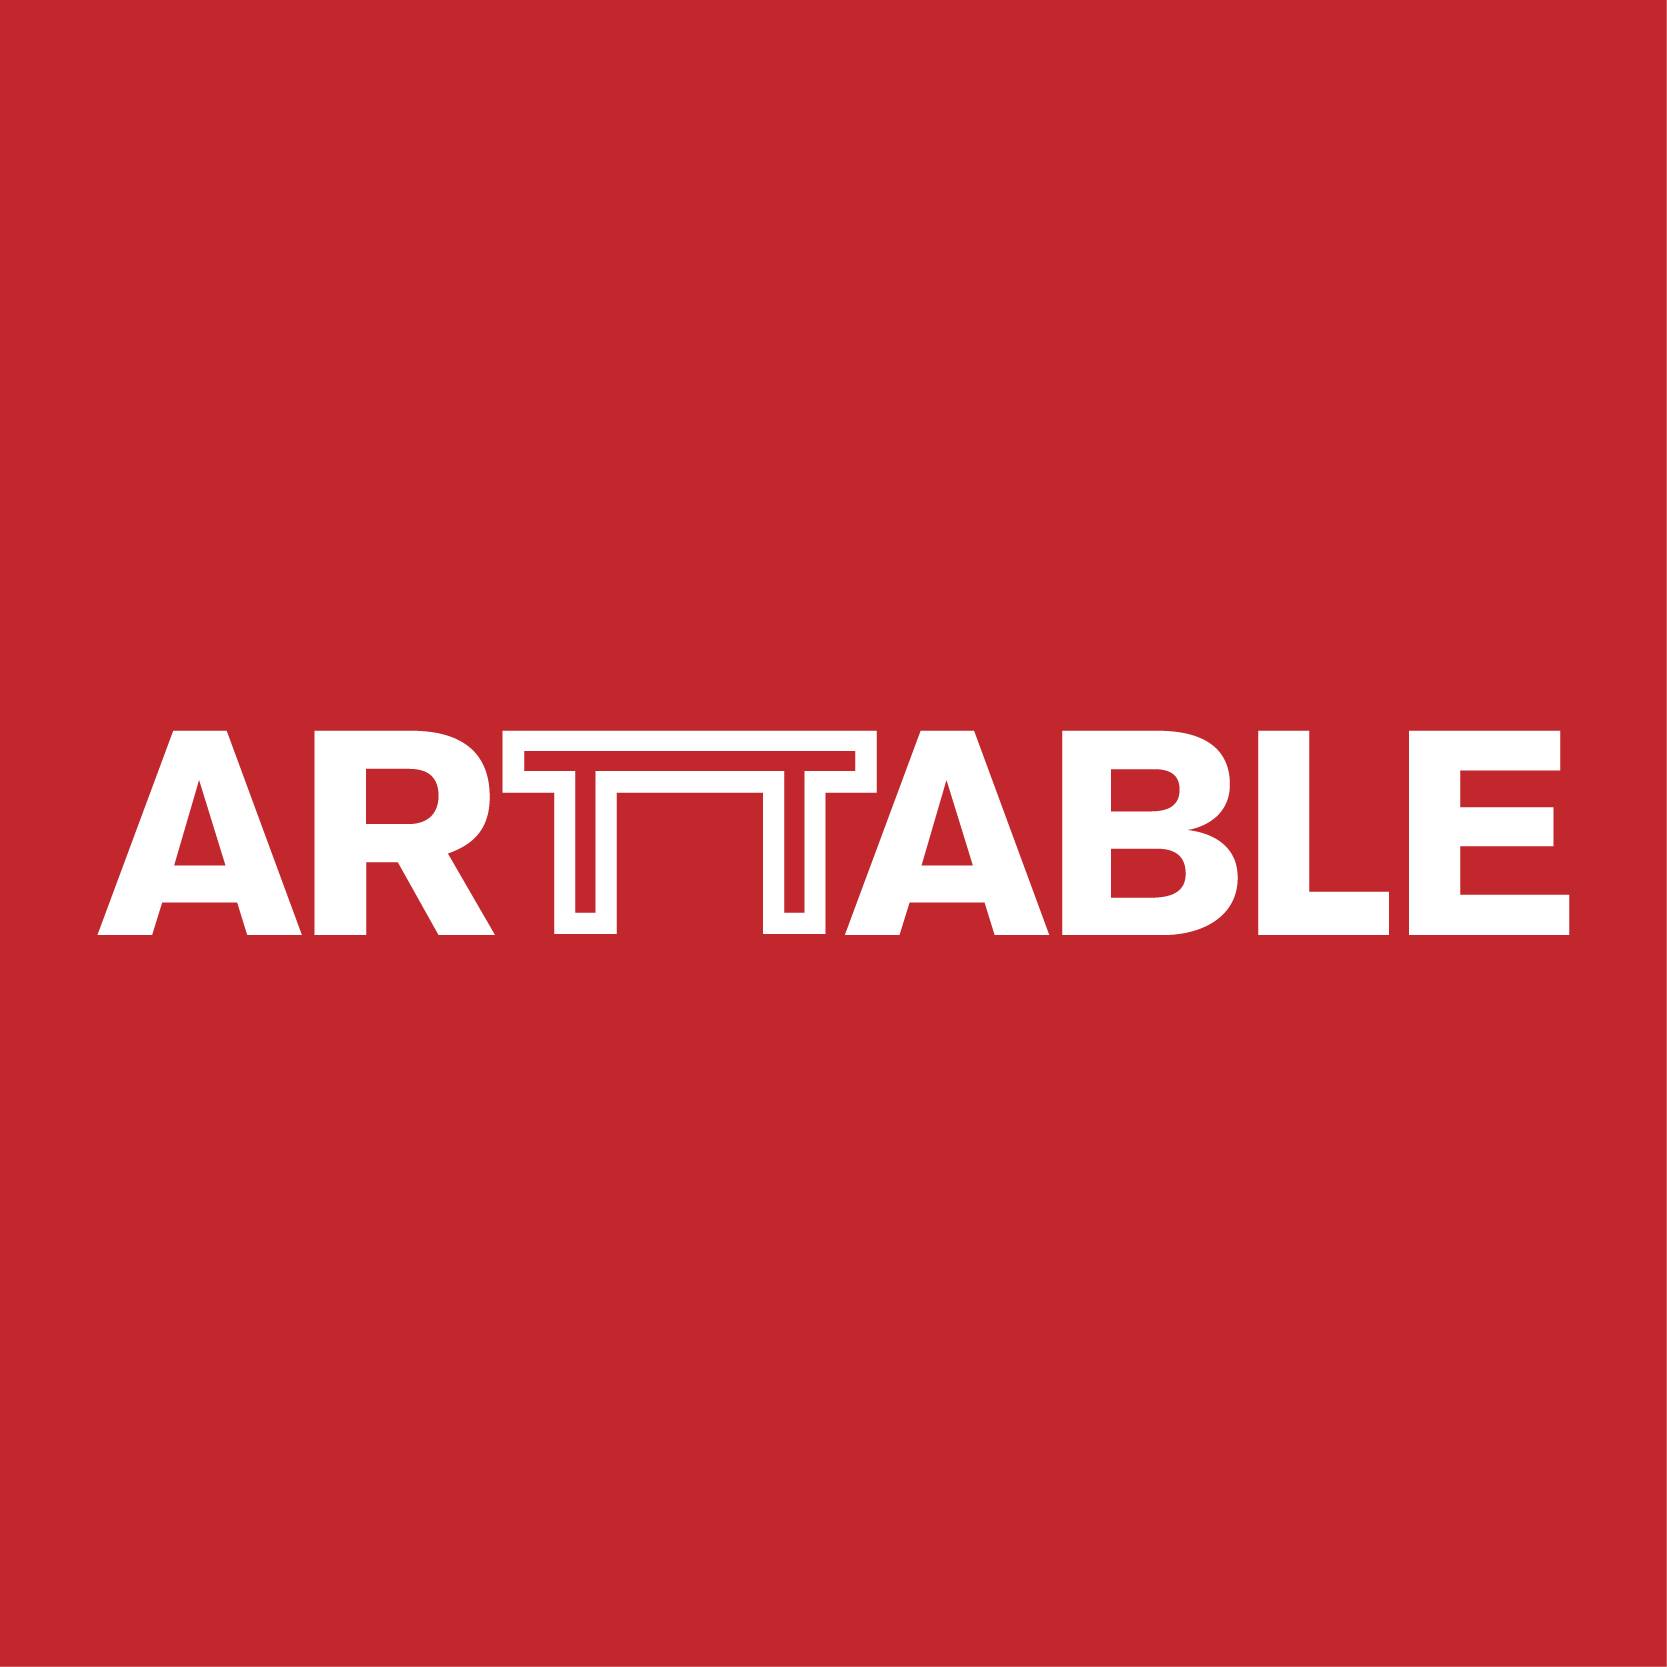 ArtTable logo in white set against a red background